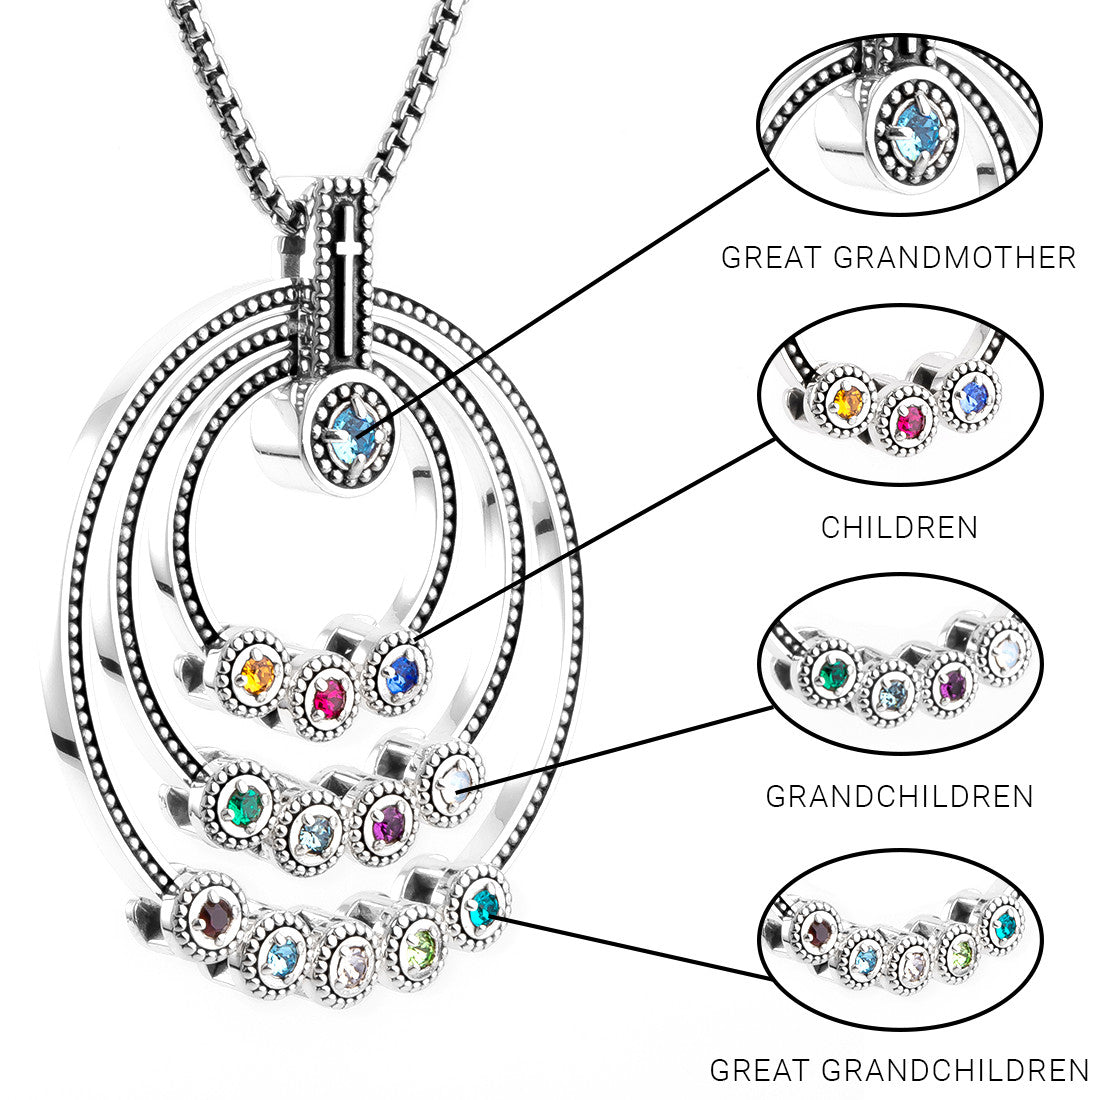 GREAT GRANDMOTHERS "FAITH" BIRTHSTONE NECKLACE